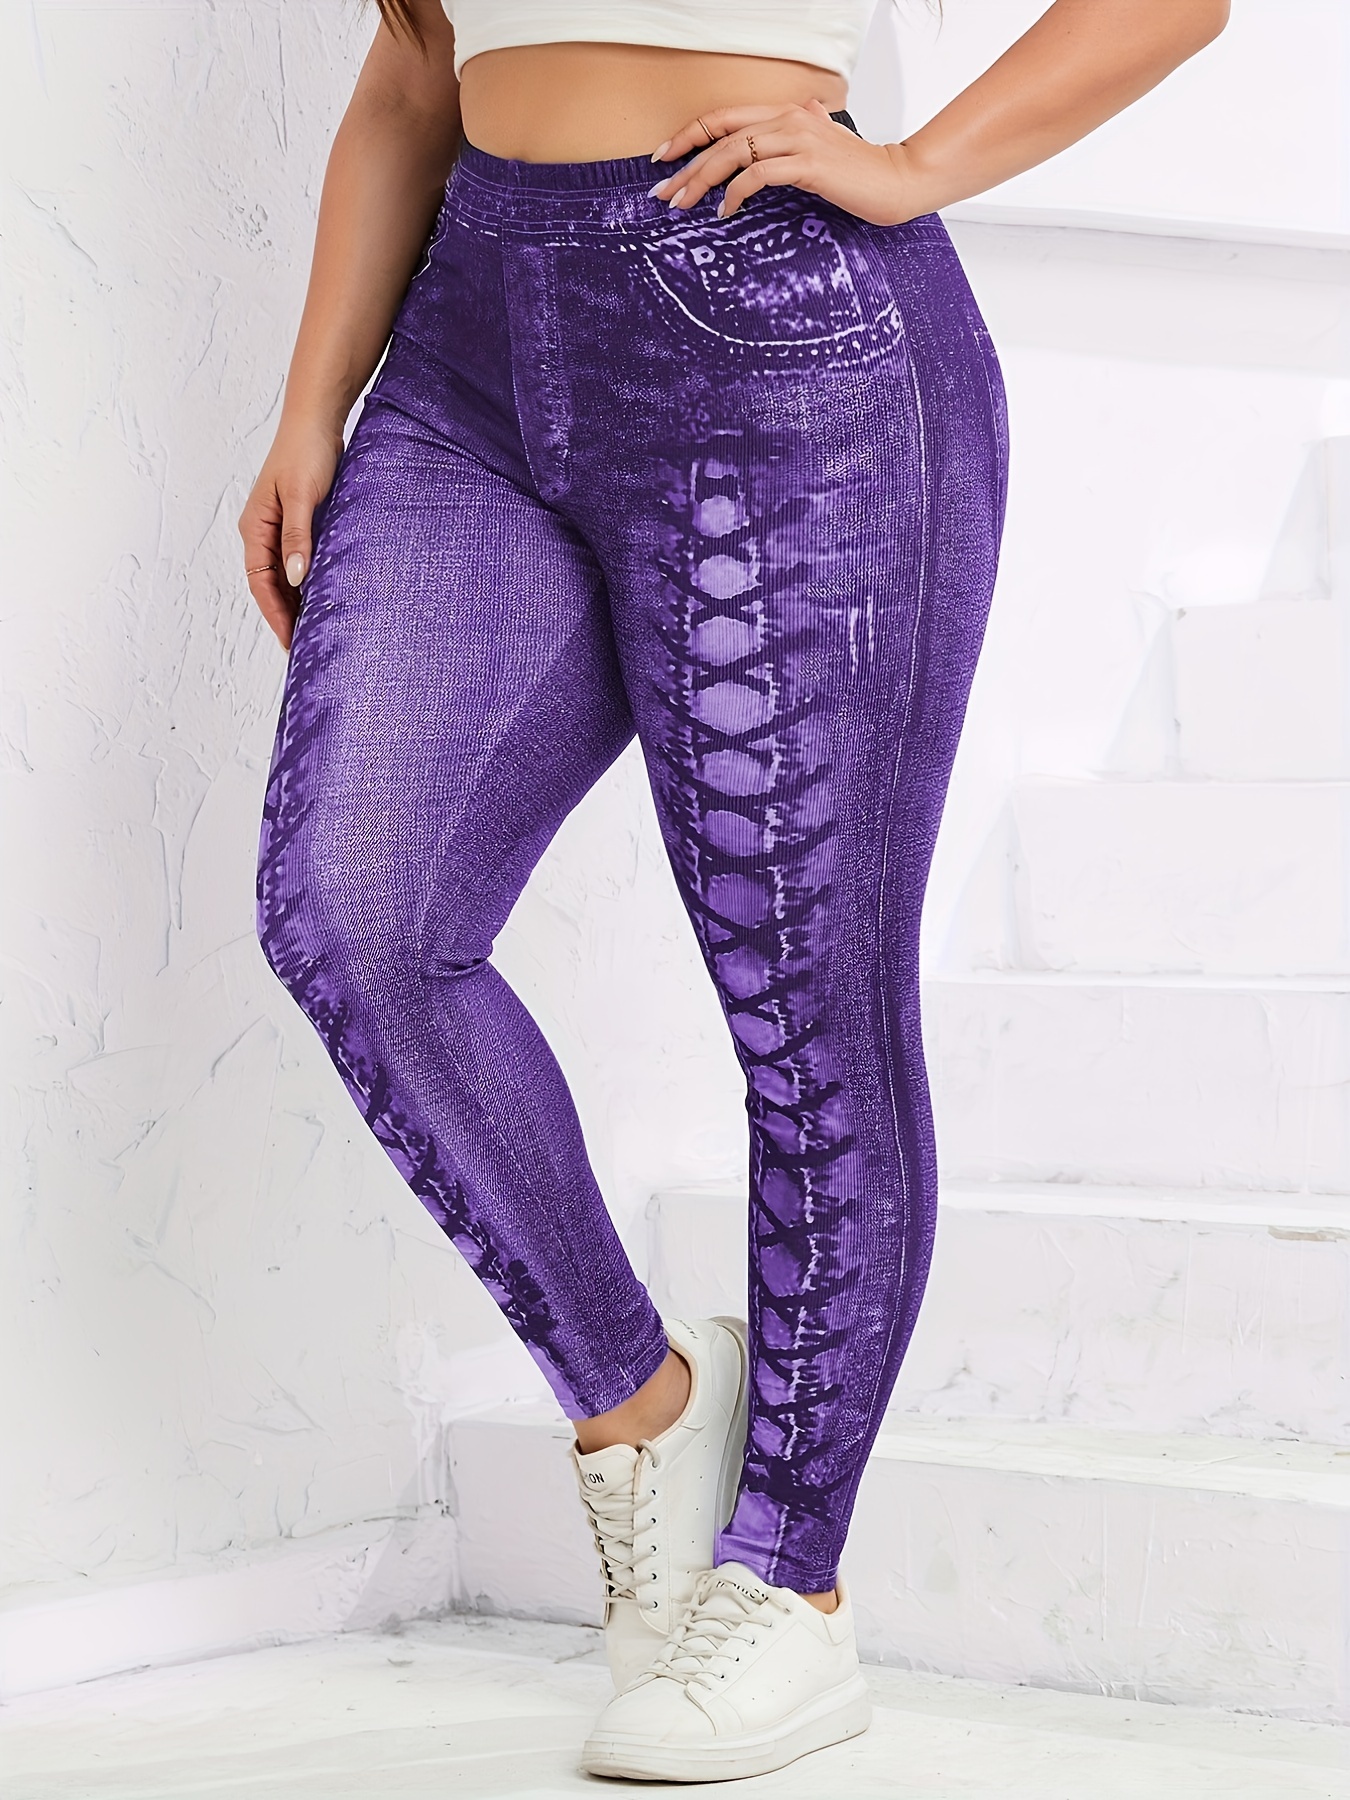 TALA Zinnia High Waisted Leggings In Purple Exclusive To ASOS for